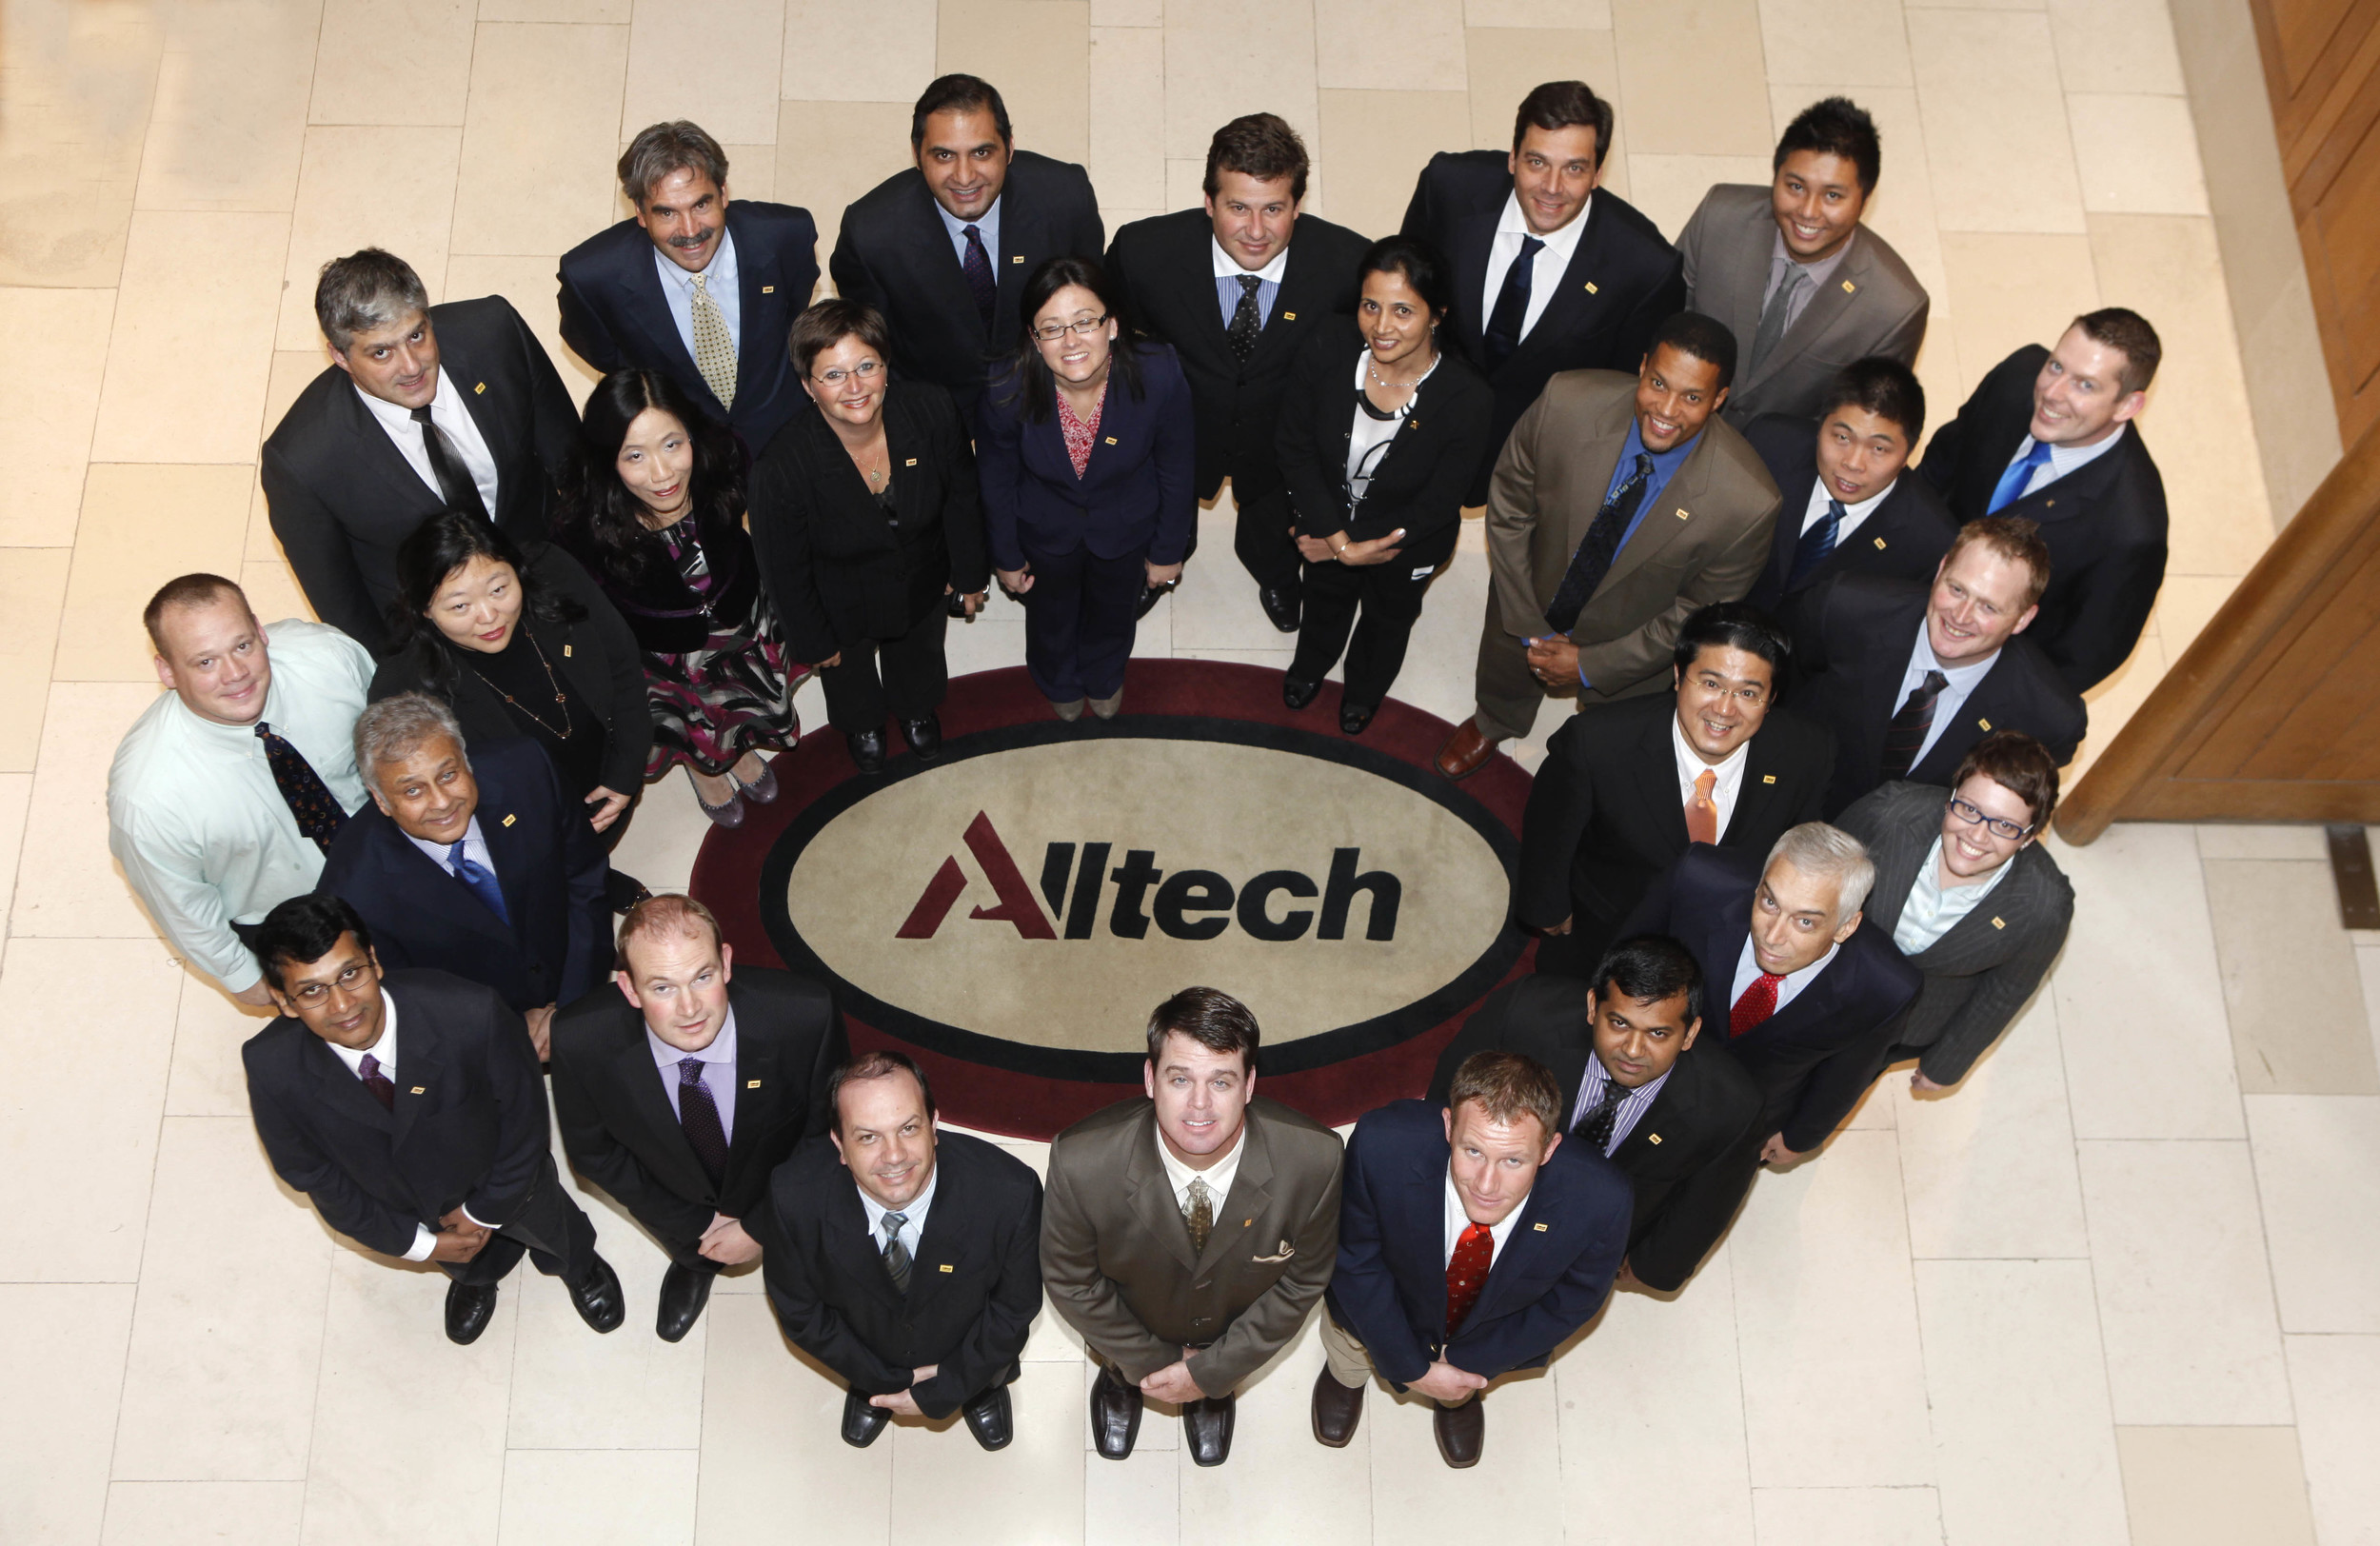  Alltech group at conference 